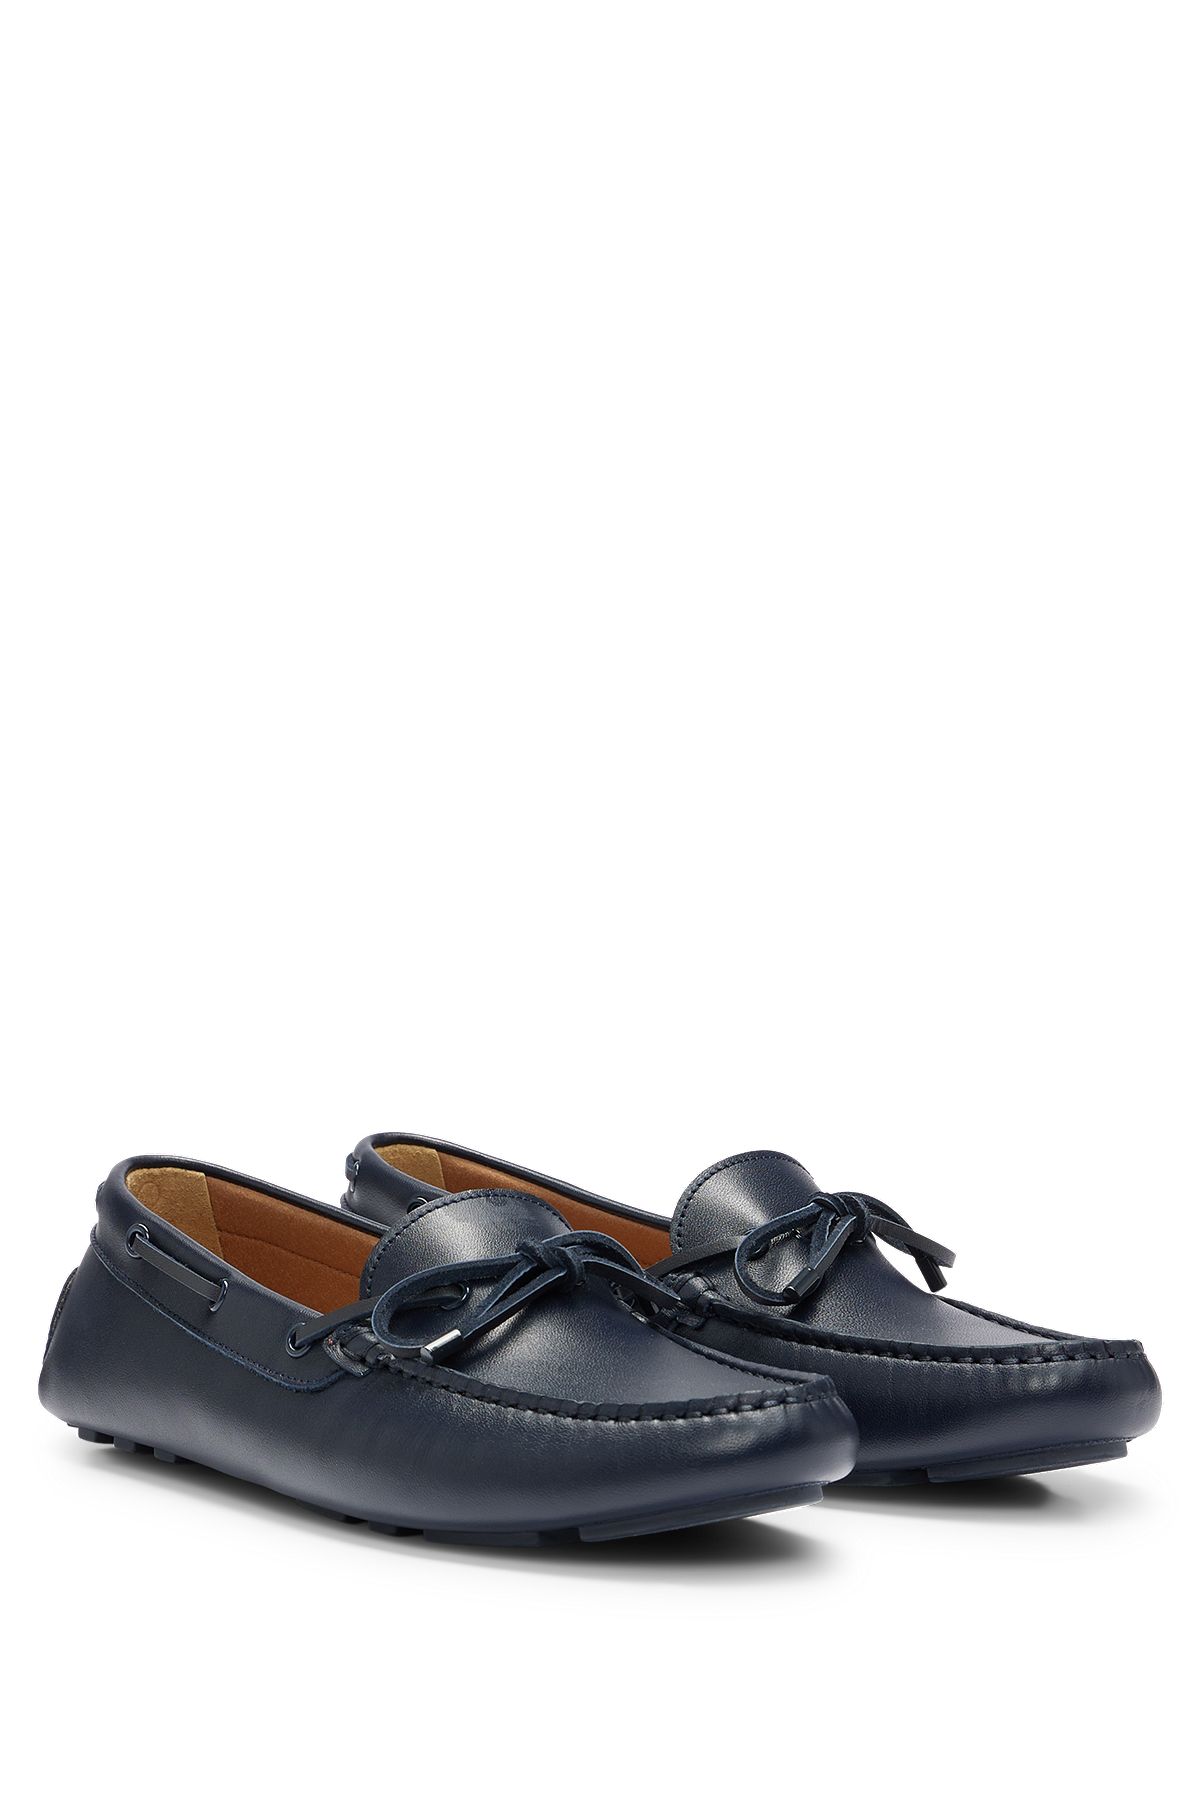 Driver moccasins in leather with bow detail, Dark Blue